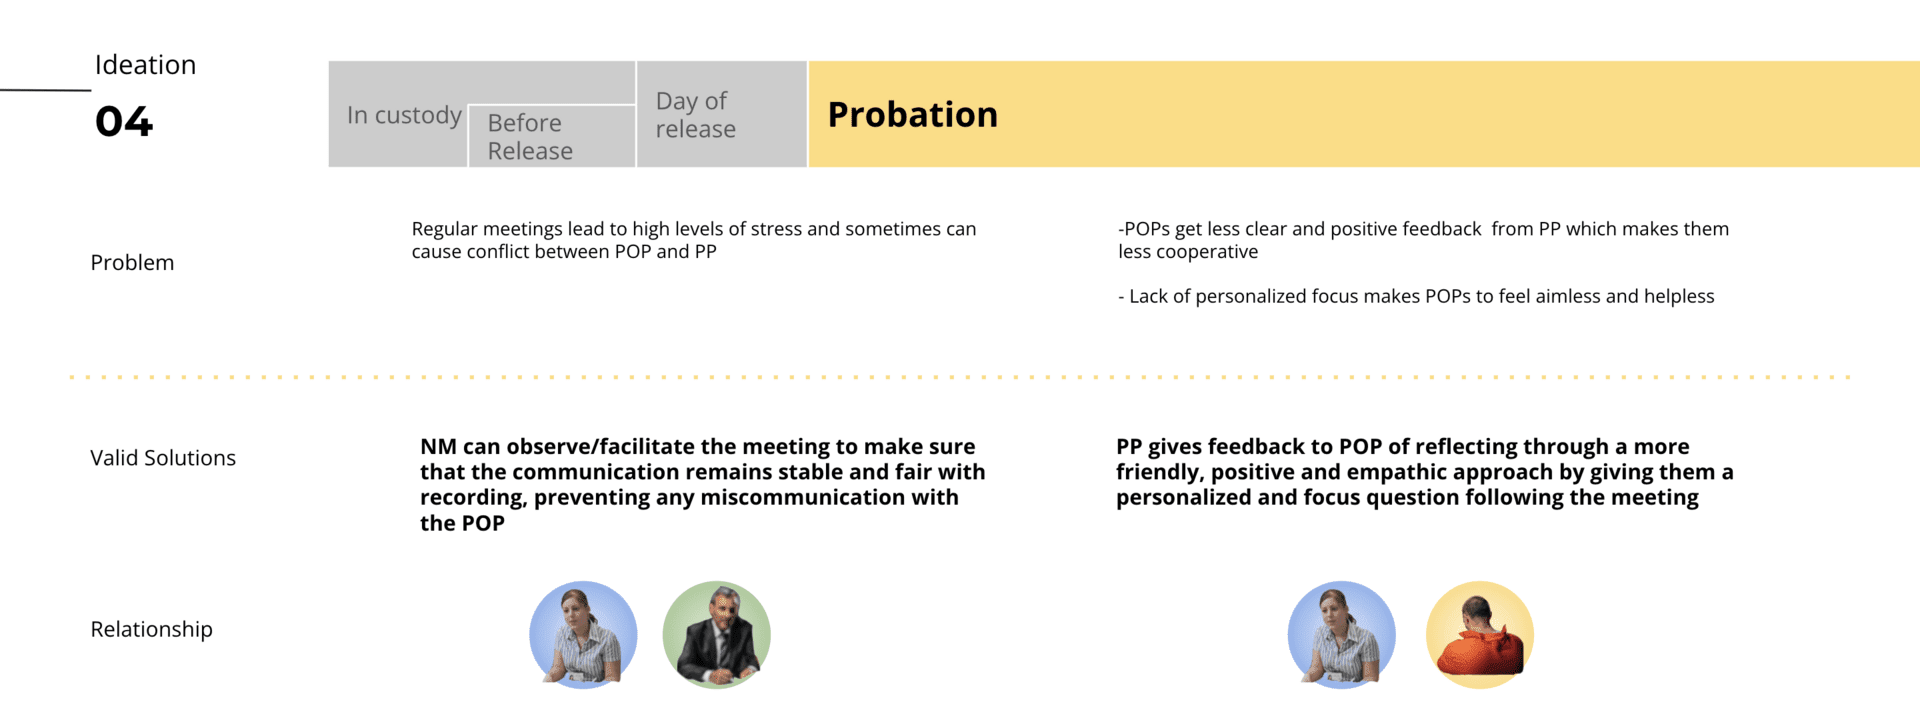 Guideline Package 4: Probation — The lack of feedback and a harmonic environment in the existing system does not allow them to understand if they are behaving correctly or not. So package 4 focuses on